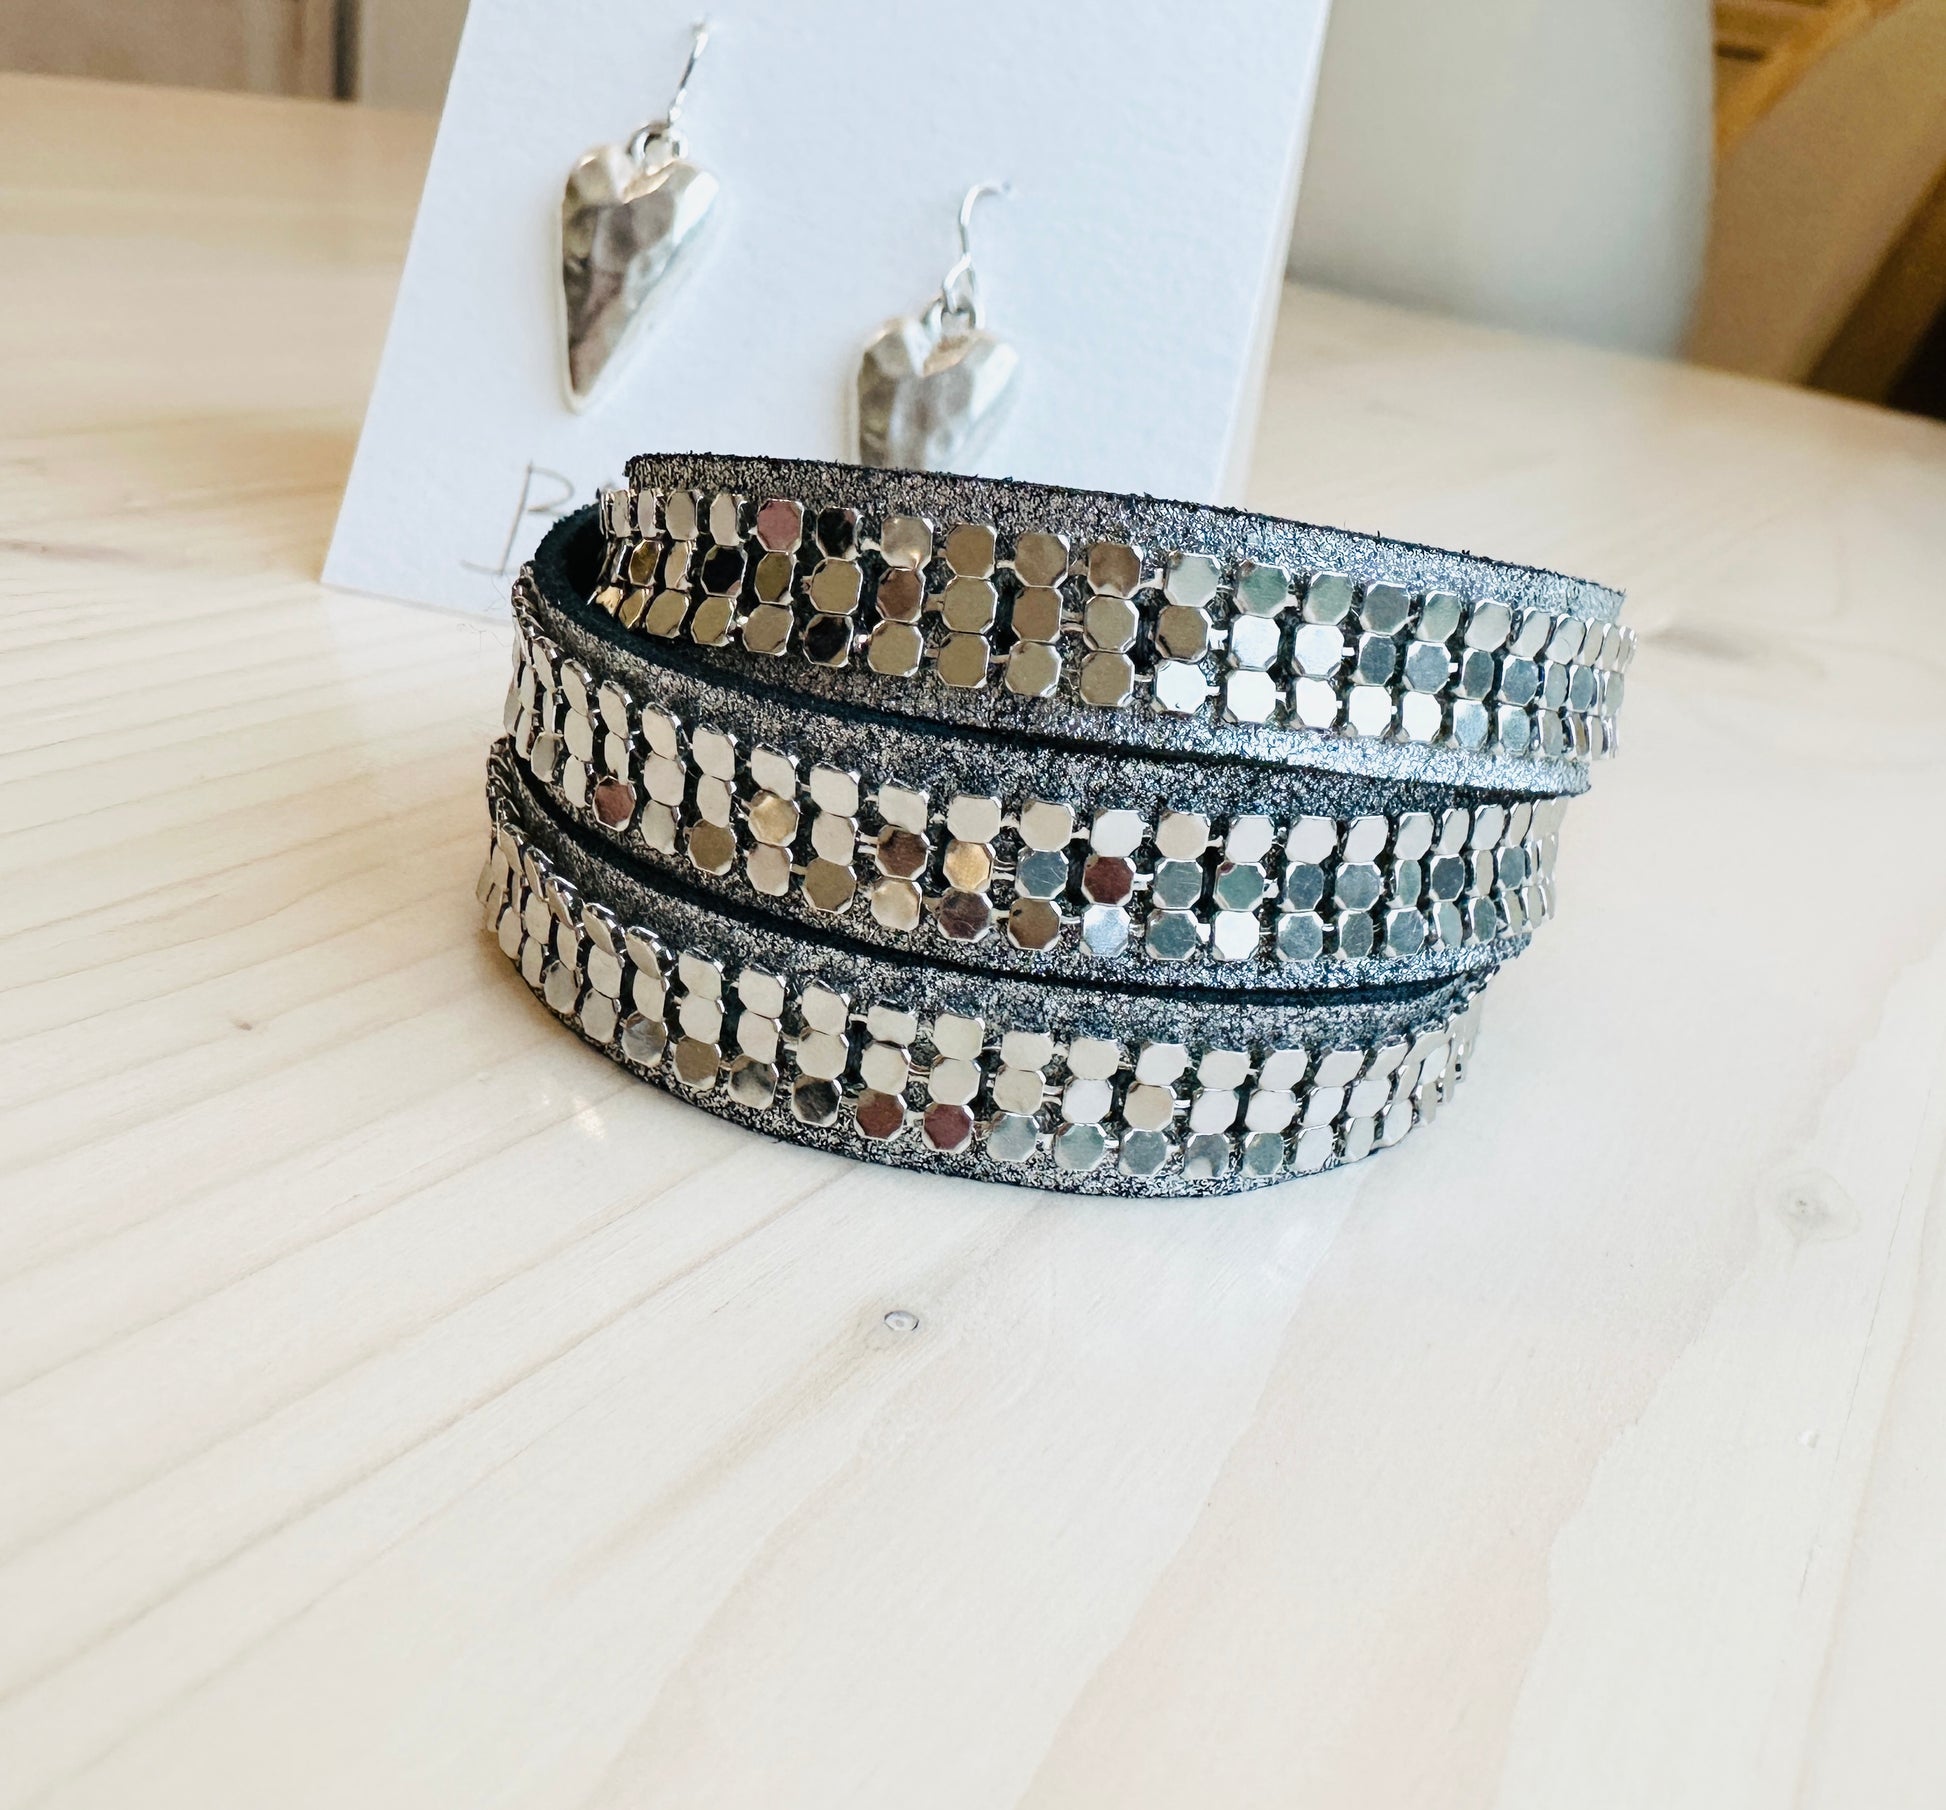 Twilight Wrap Bracelet and heart shaped earrings on table that are  Handmade in the USA